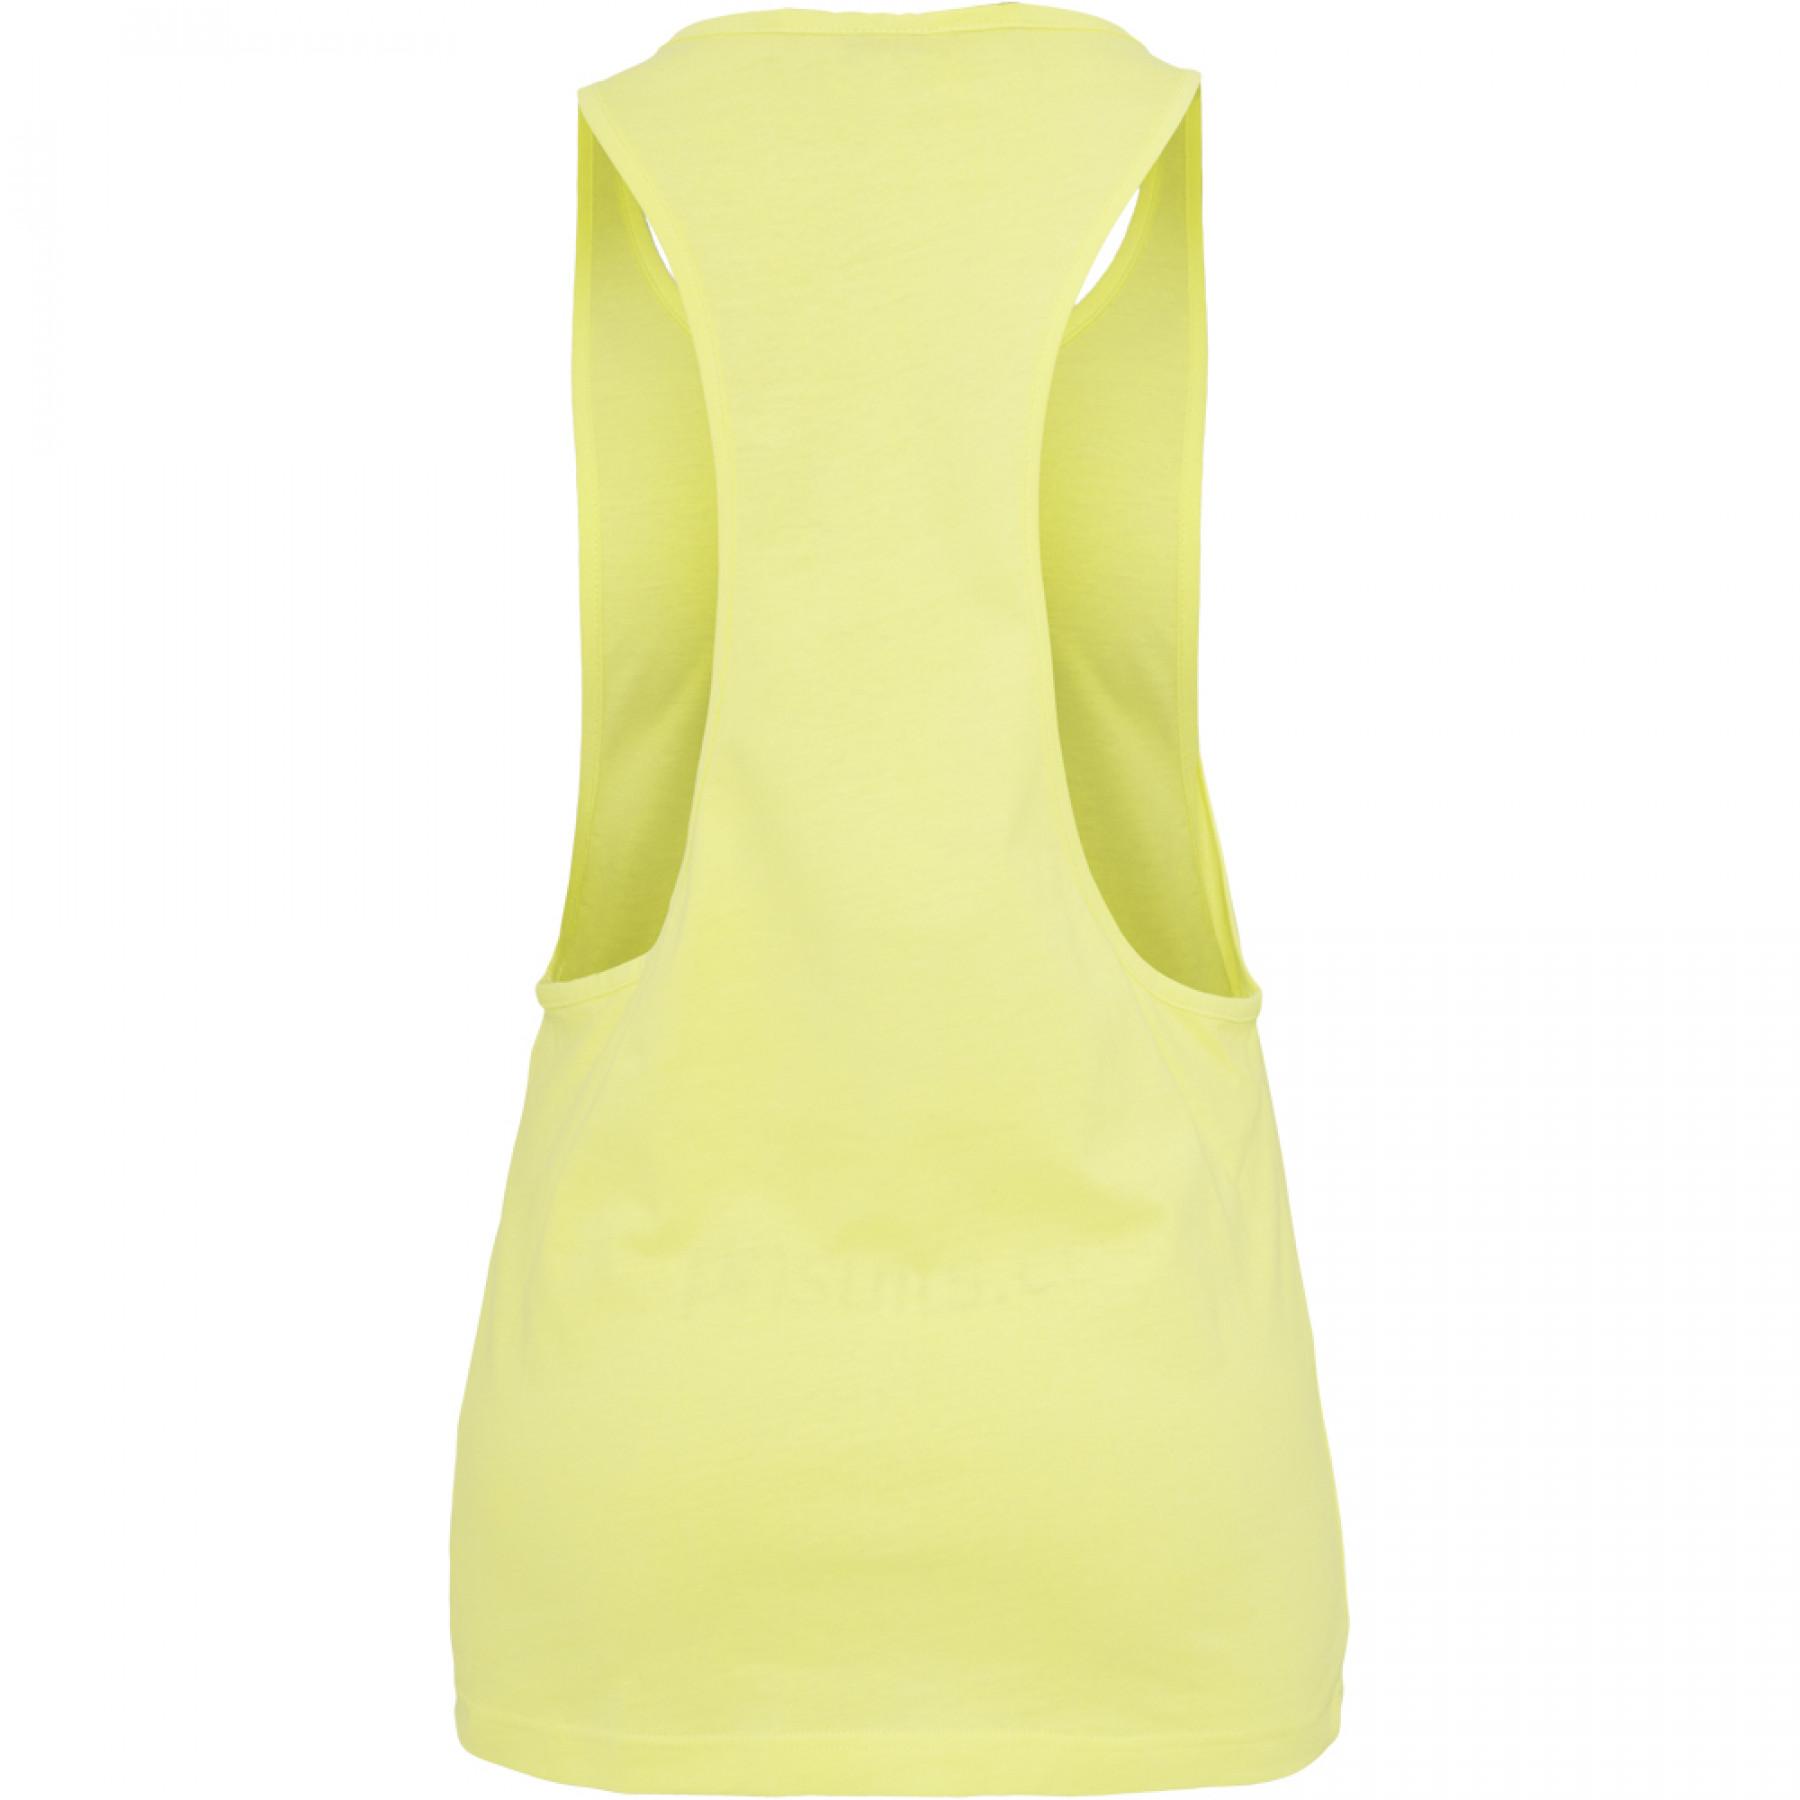 Women's Urban Classic loose neon tank top - Others - Brands - Lifestyle